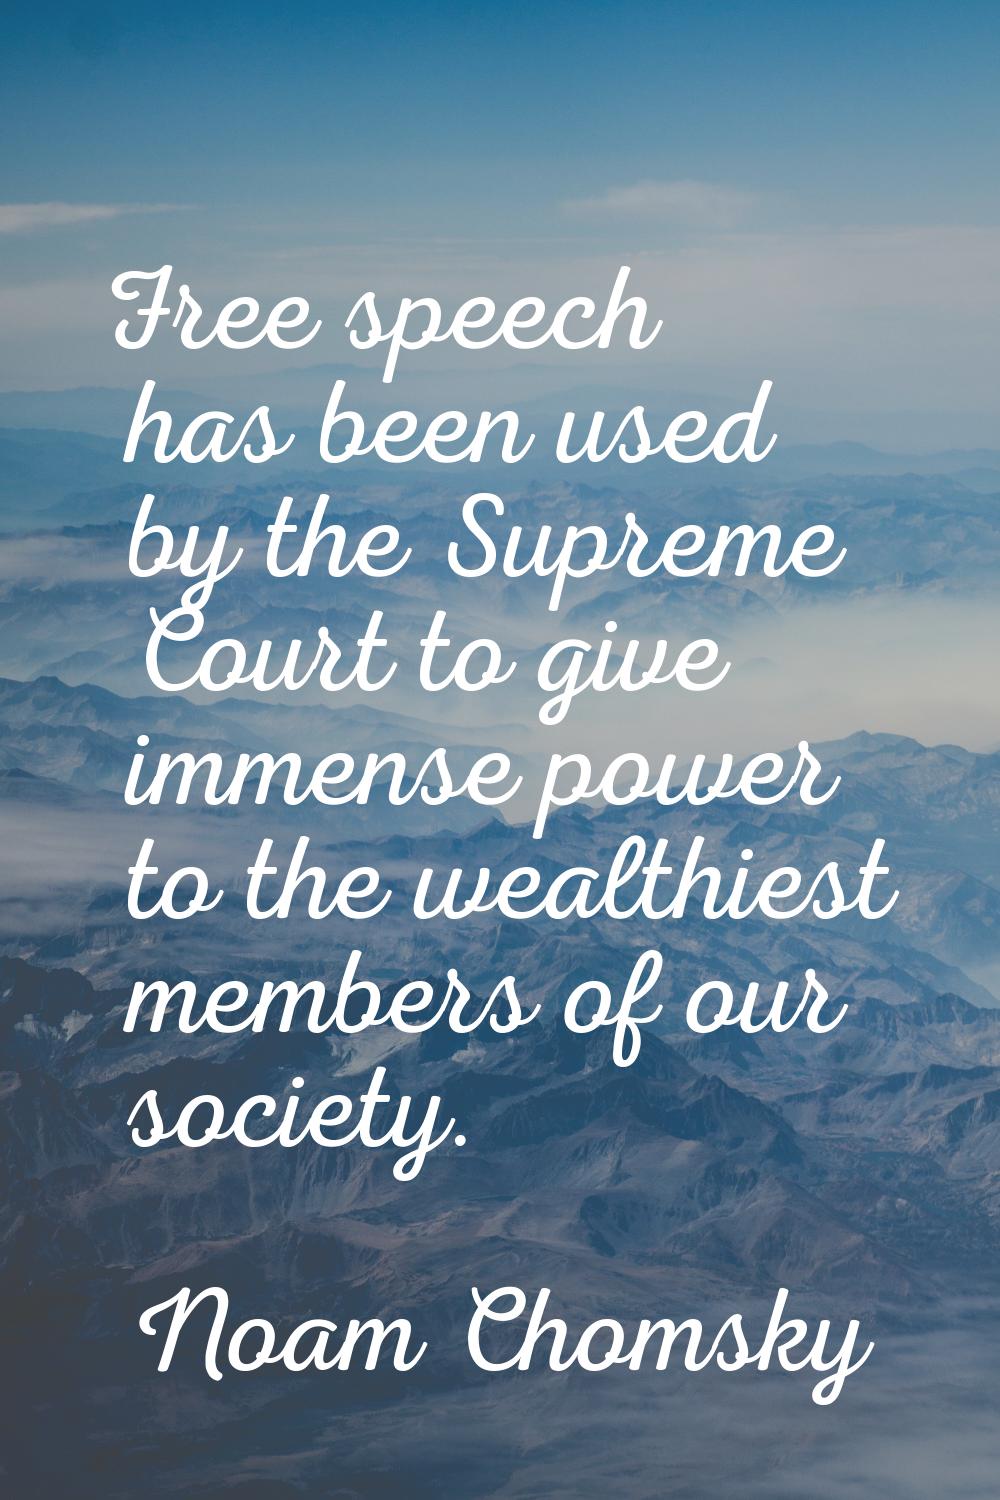 Free speech has been used by the Supreme Court to give immense power to the wealthiest members of o